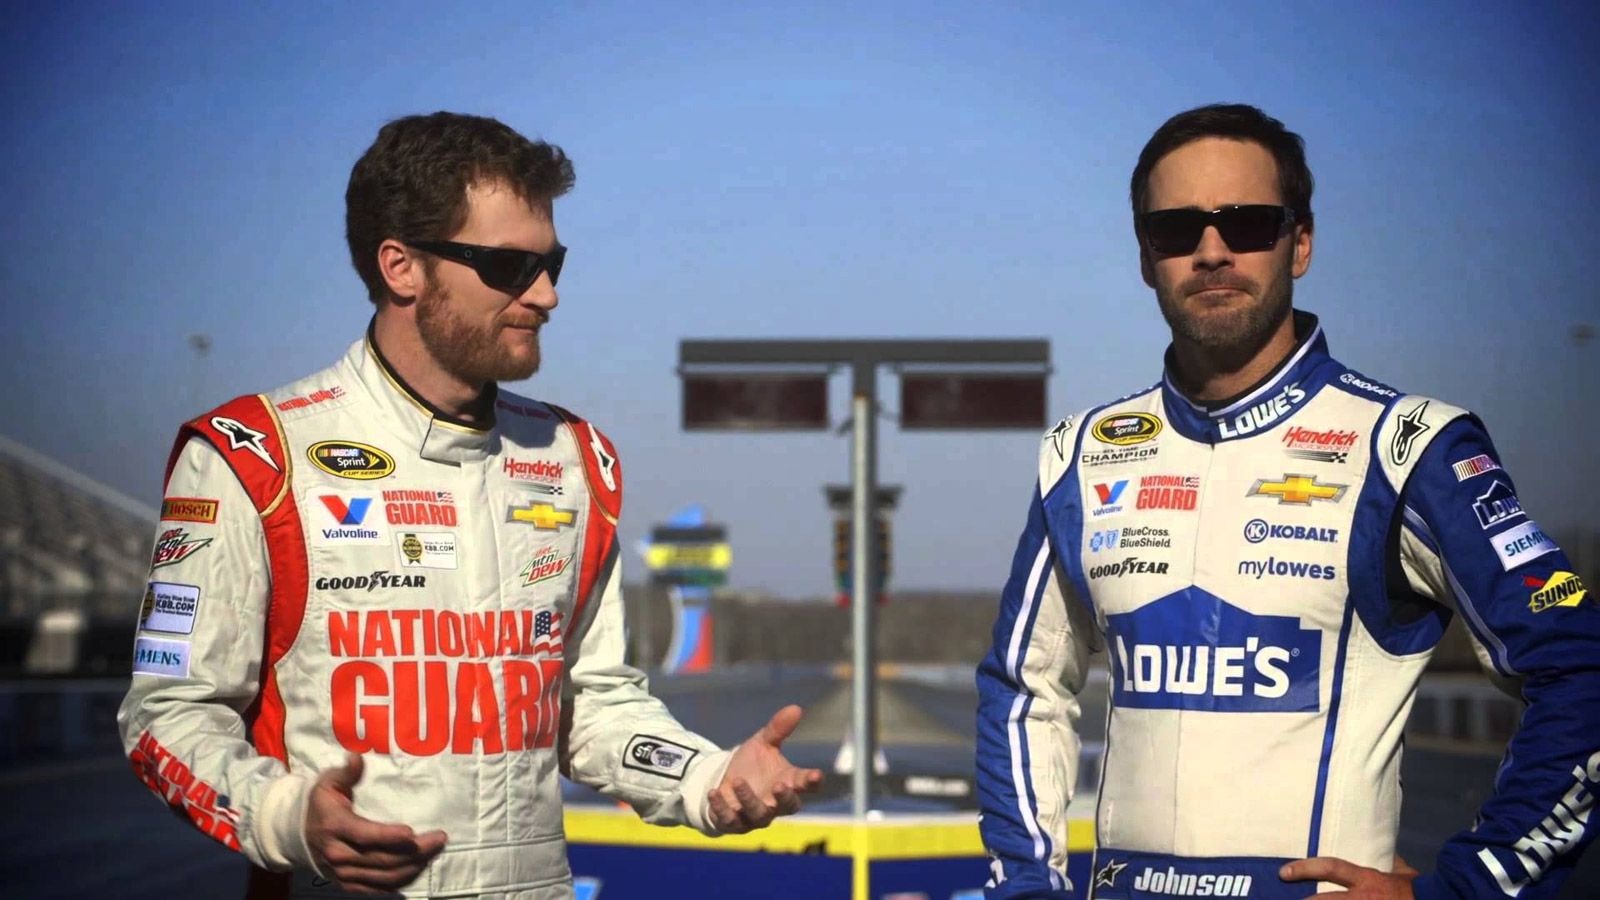 Dale Earnhardt Jr. and Jimmie Johnson 